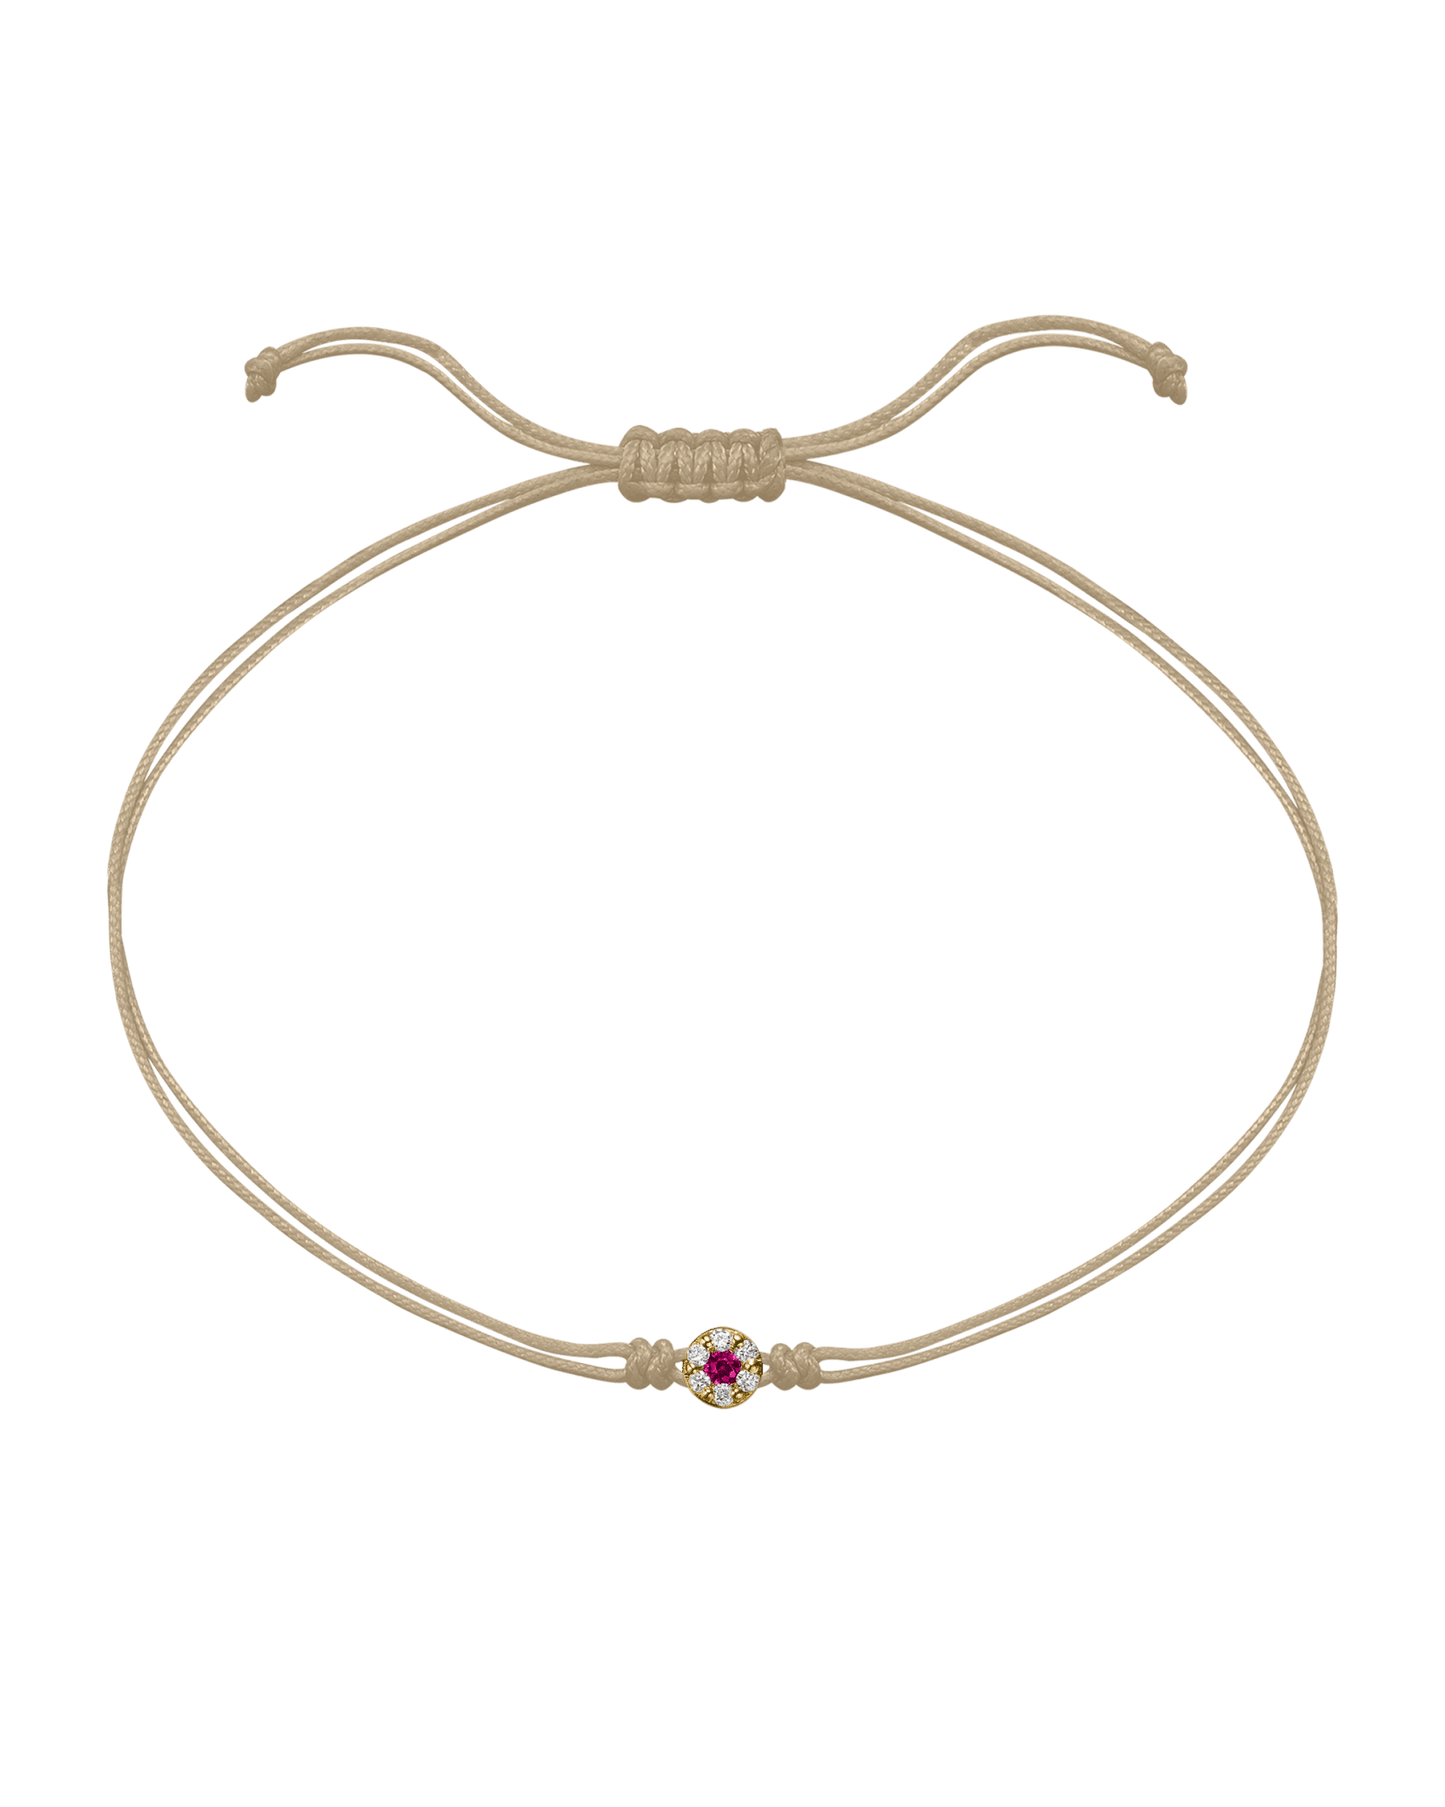 String of Love Diamond and Gemstone - 14K Yellow Gold Bracelet 14K Solid Gold Beige Ruby 